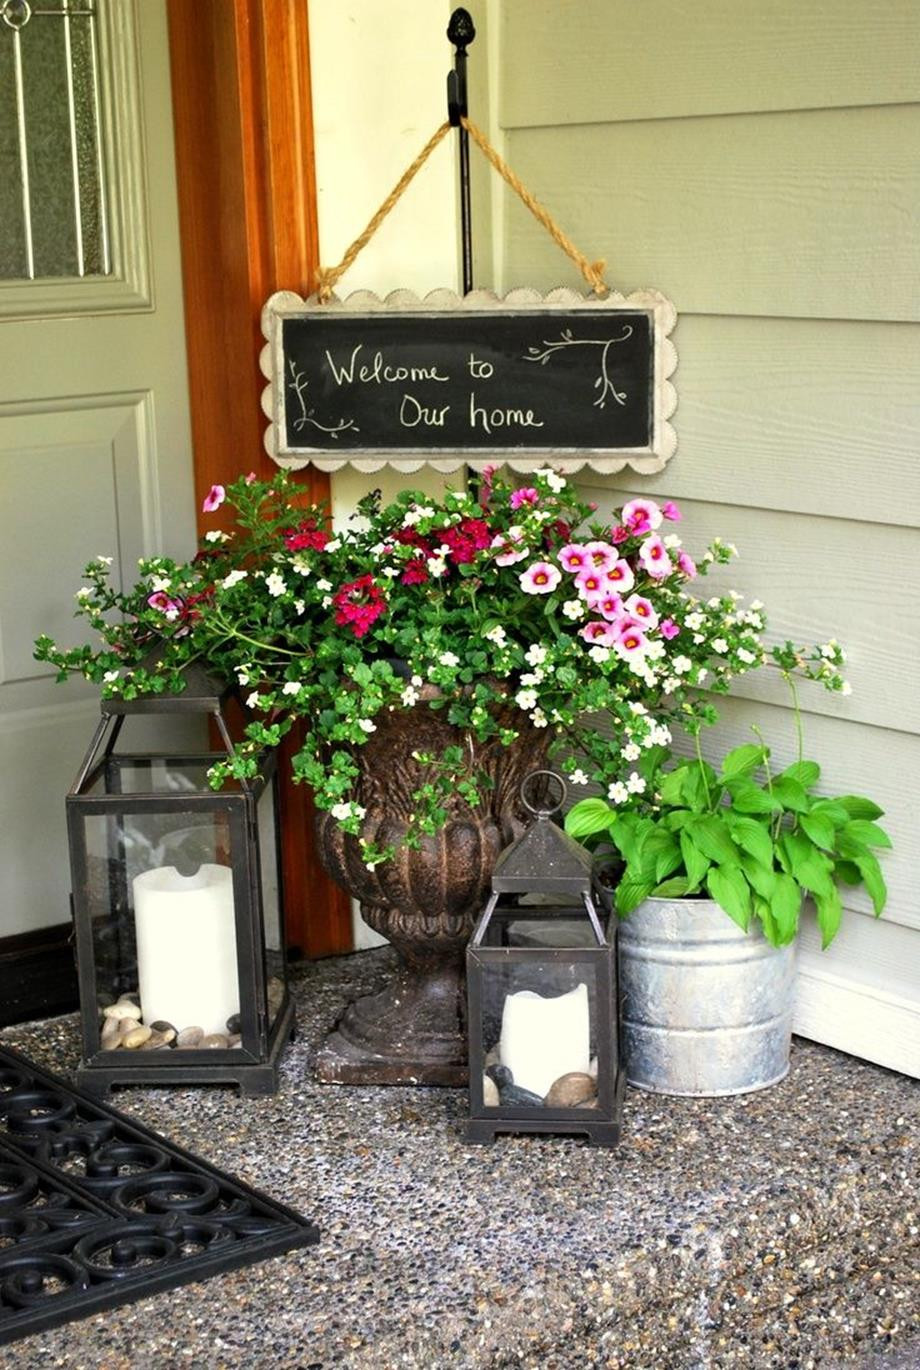 Front Porch Spring Ideas
 30 Stunning Small Front Porch Spring Decorating Ideas